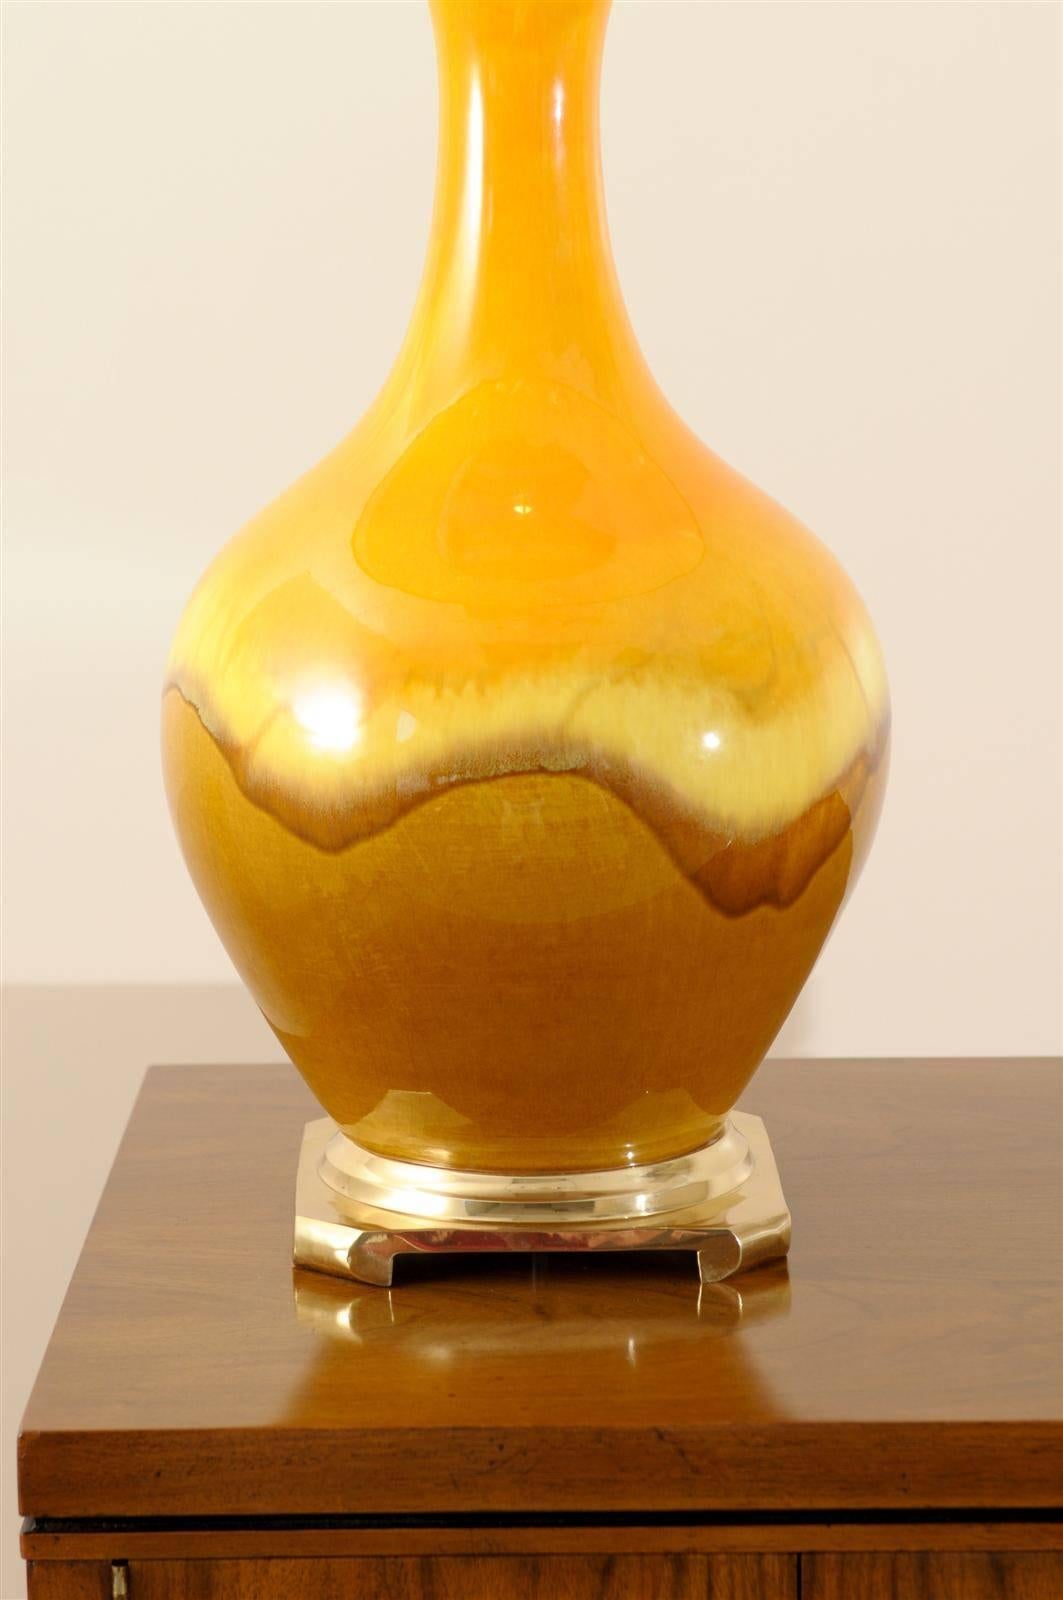 Exceptional Pair of Yellow Ochre and Caramel Ceramic Lamps, circa 1970 For Sale 1